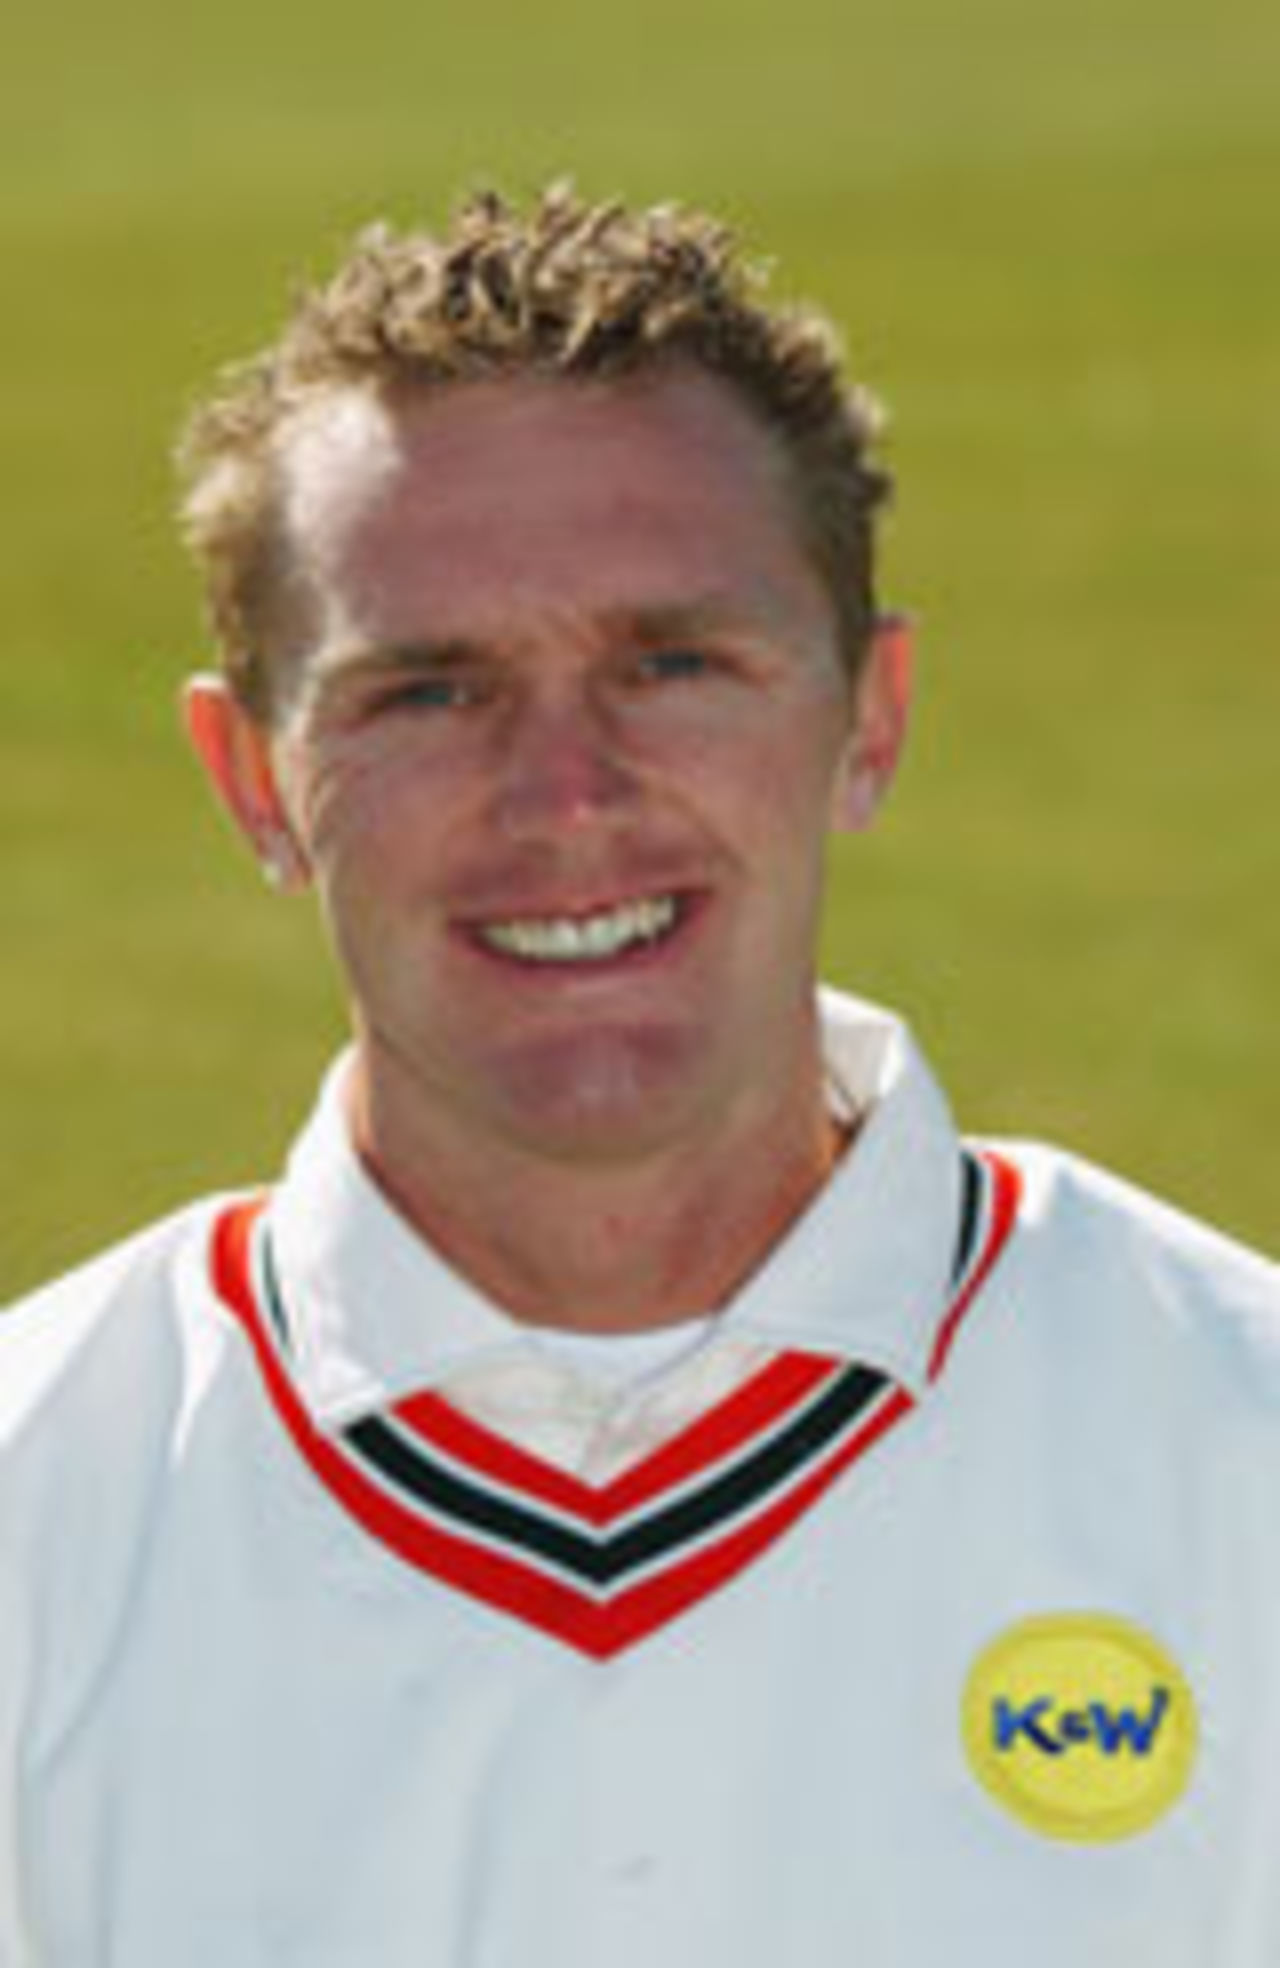 Darren Maddy, Leicestershire's new vice-captain, July 9 2004